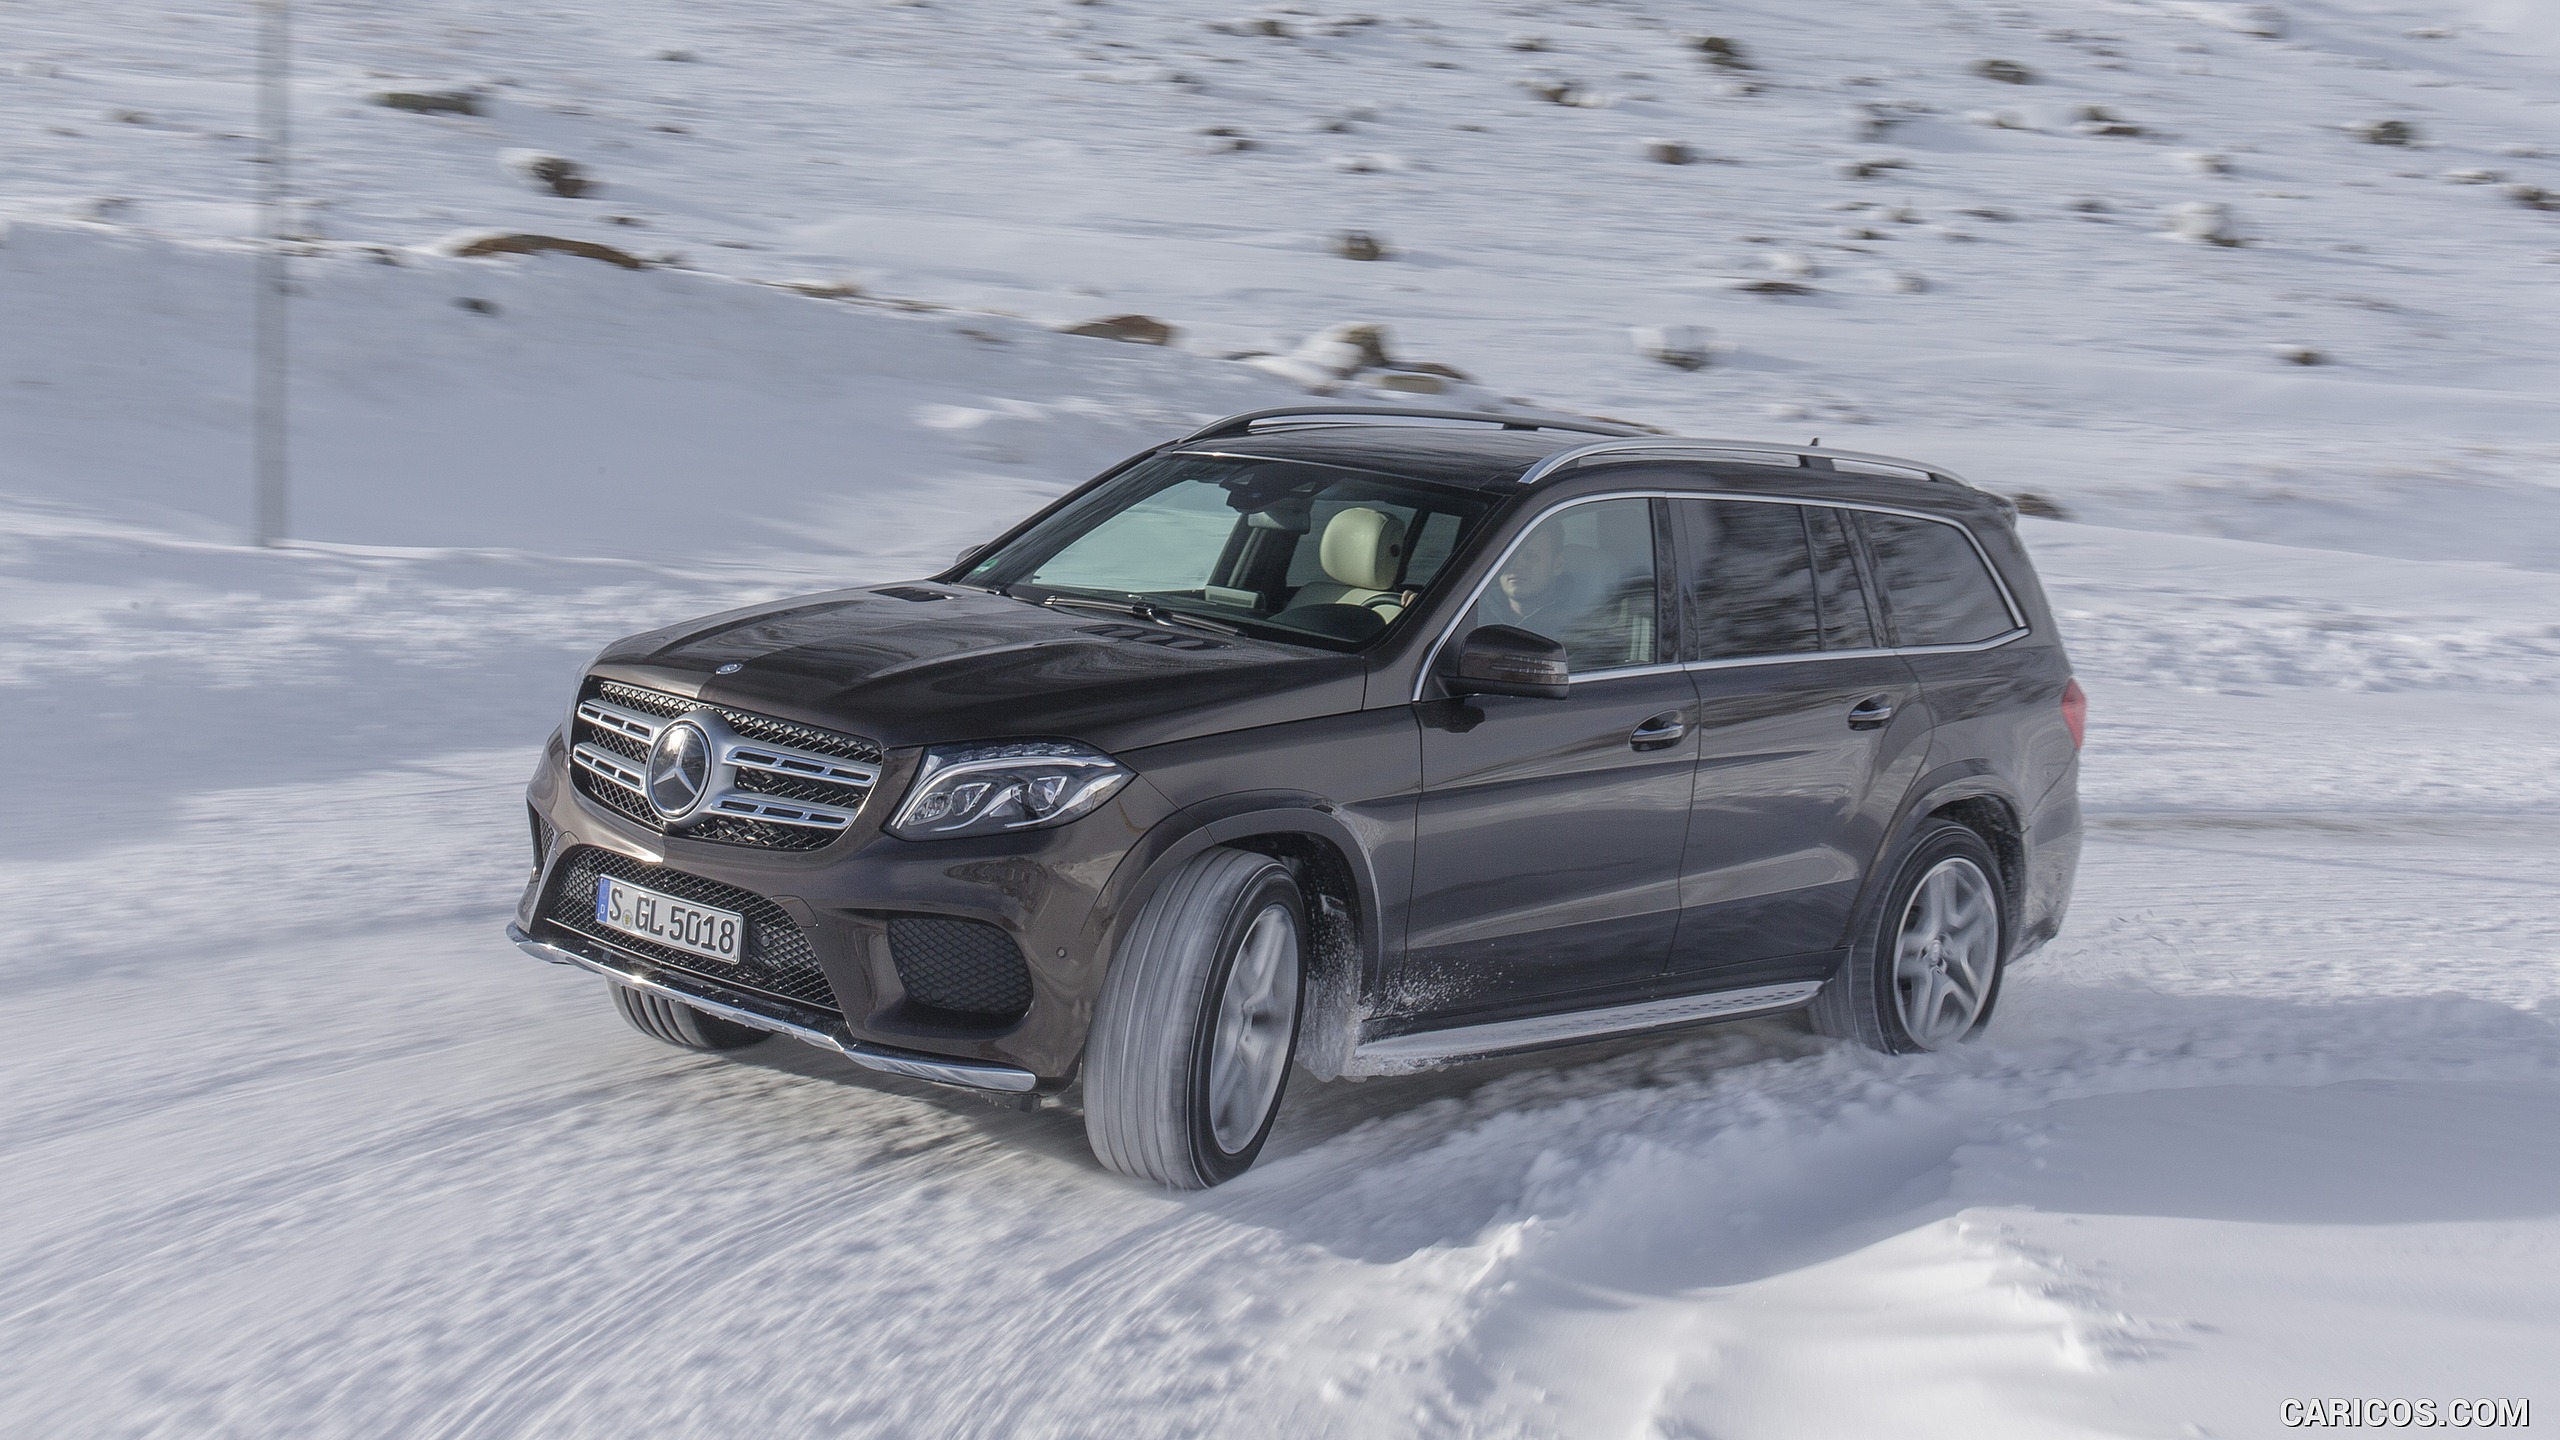 2017 Mercedes-Benz GLS 350d 4MATIC AMG Line in Snow - Front, #183 of 255